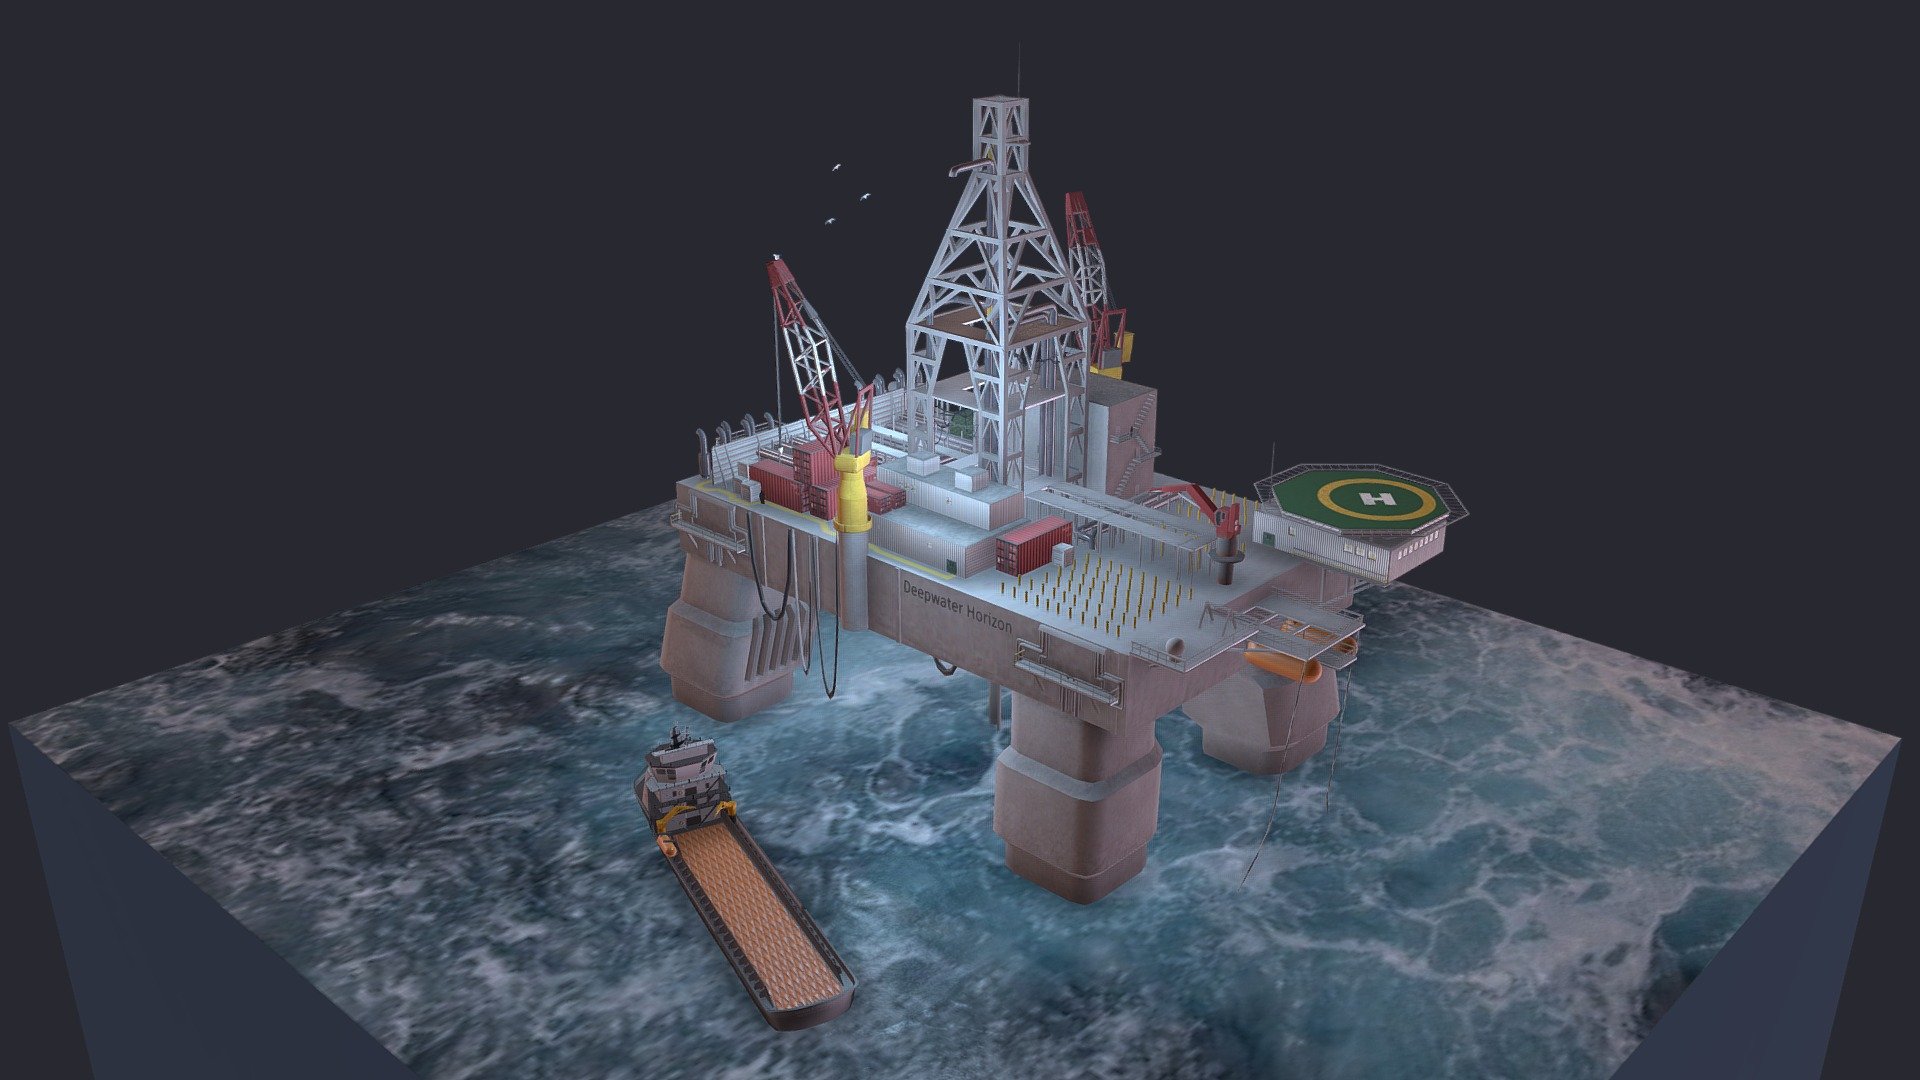 The Deepwater Horizon explosion occurred on April 20, 2010 in the Gulf of Mexico, killing 11 and causing one of the largest marine oil spills in history 3d model